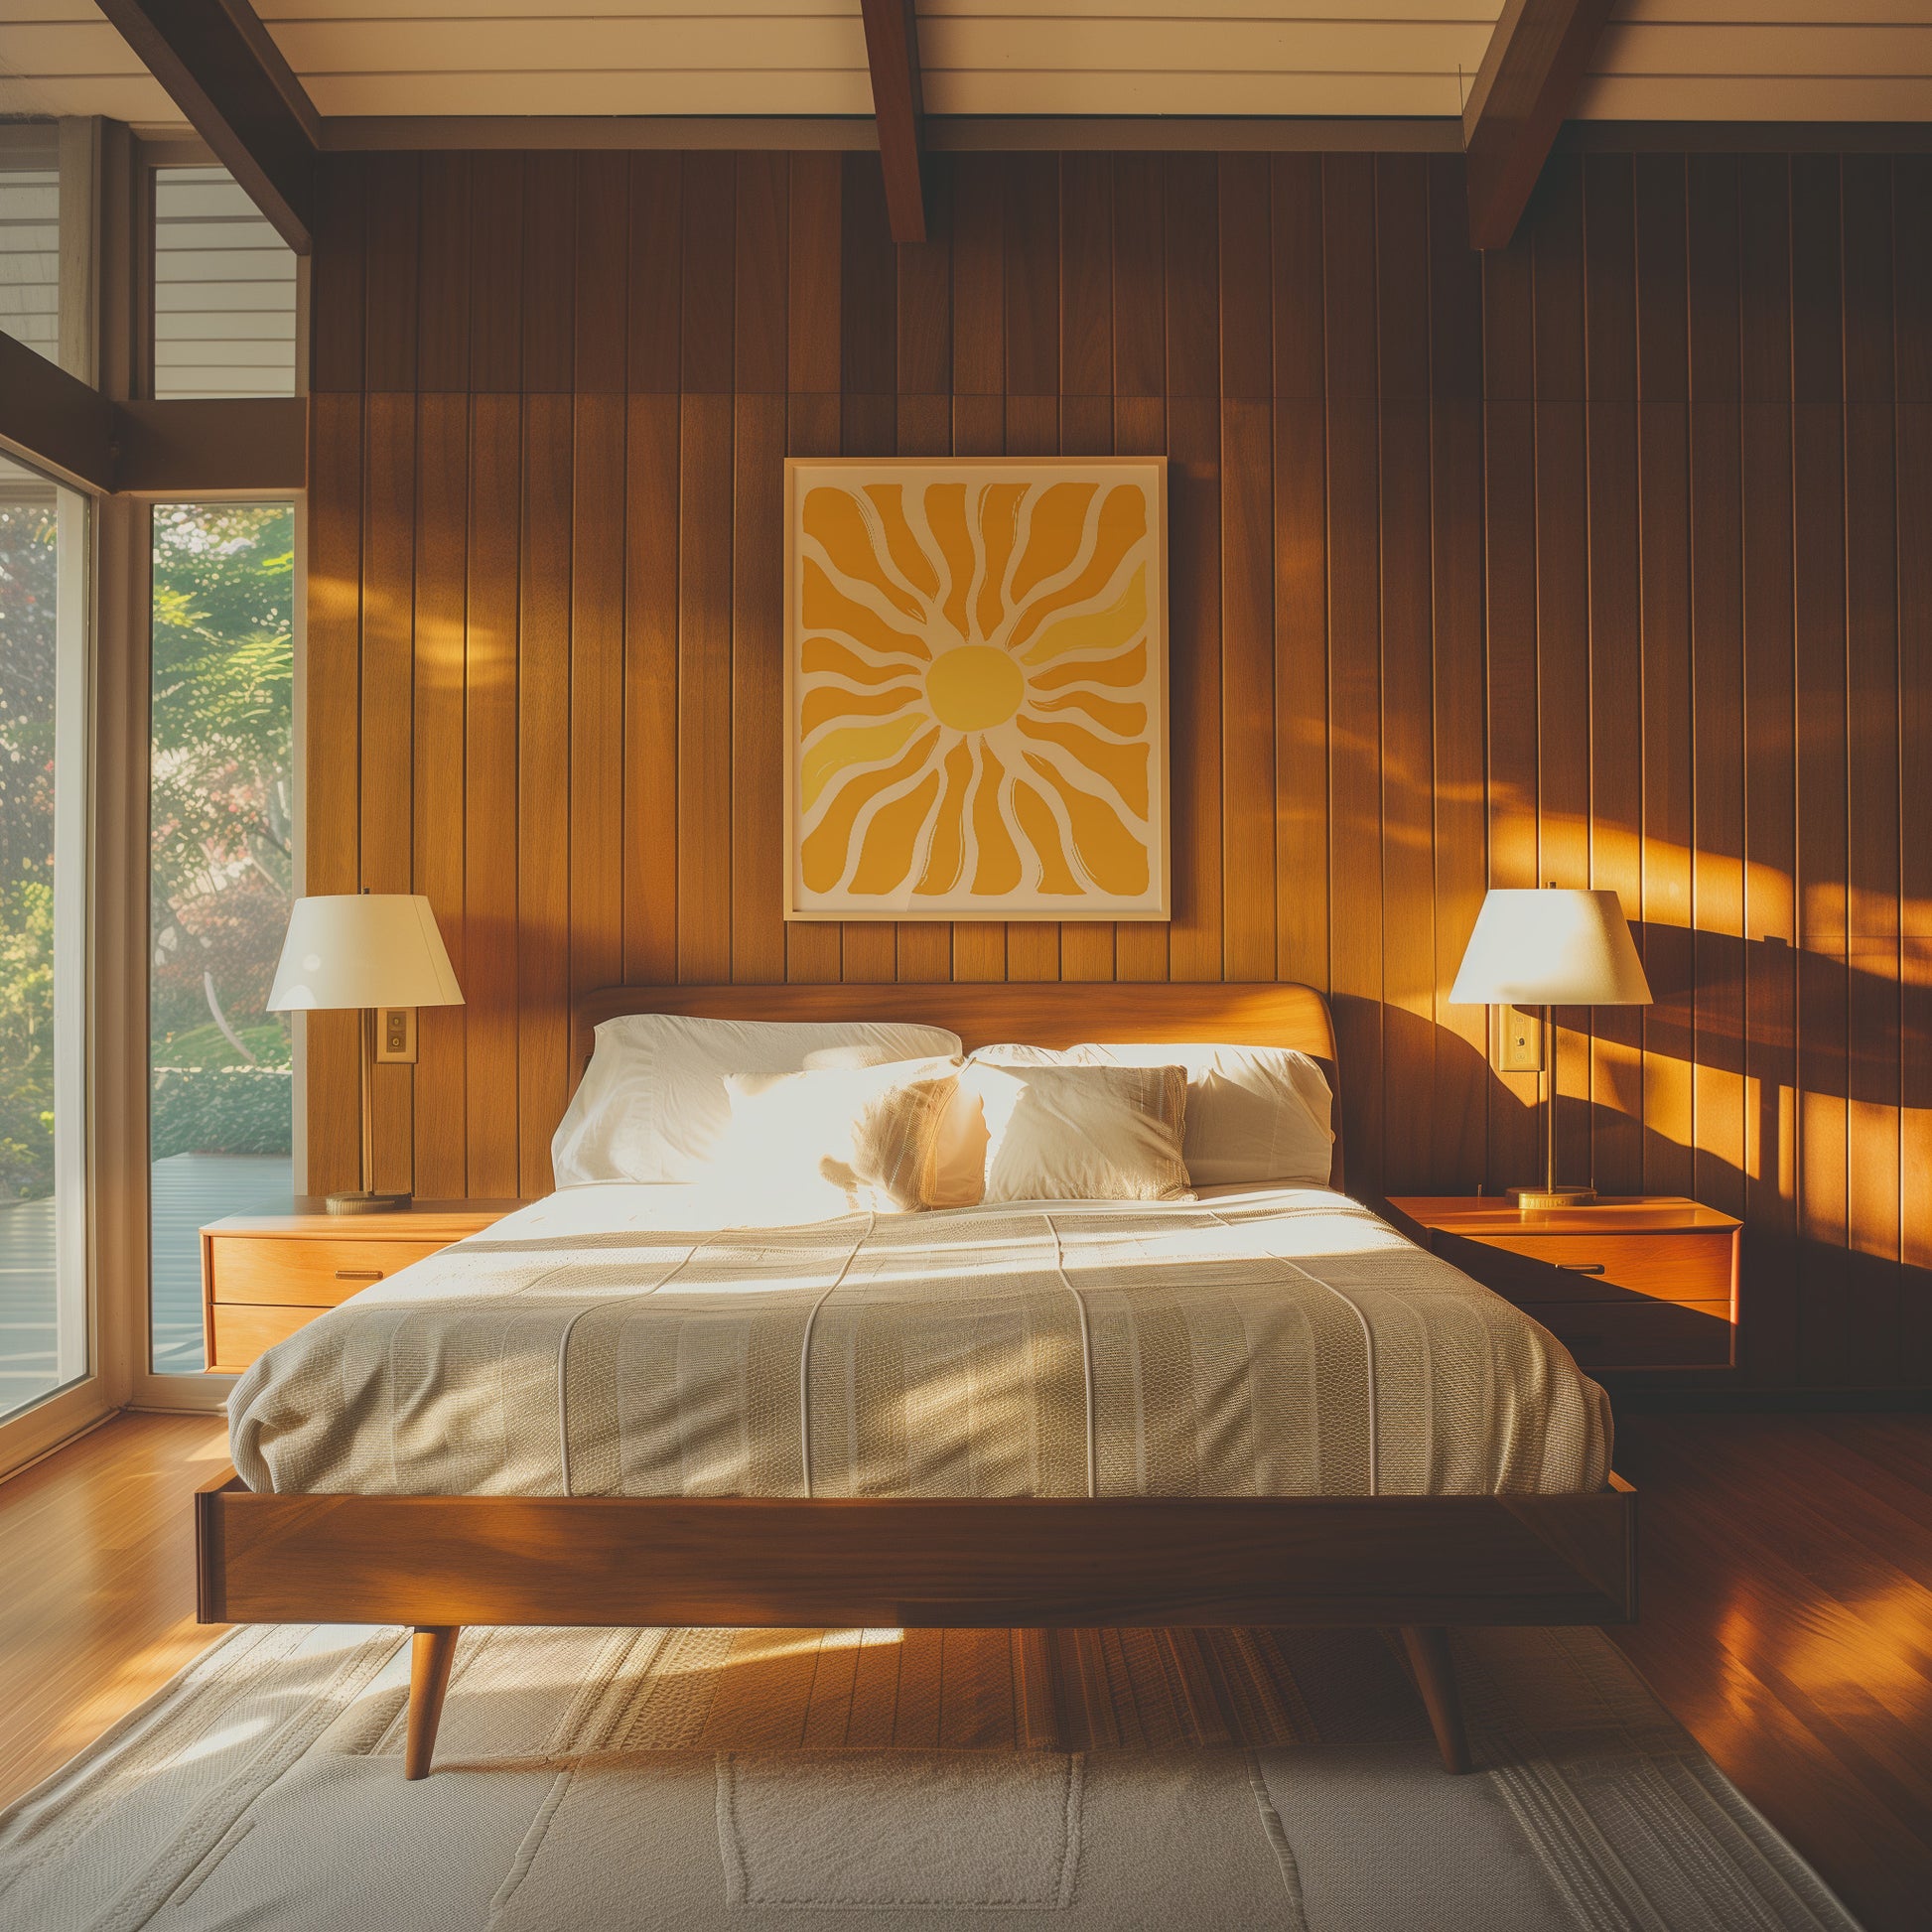 Cozy bedroom with a modern wooden bed, sunlight casting warm glow, artwork above the headboard.